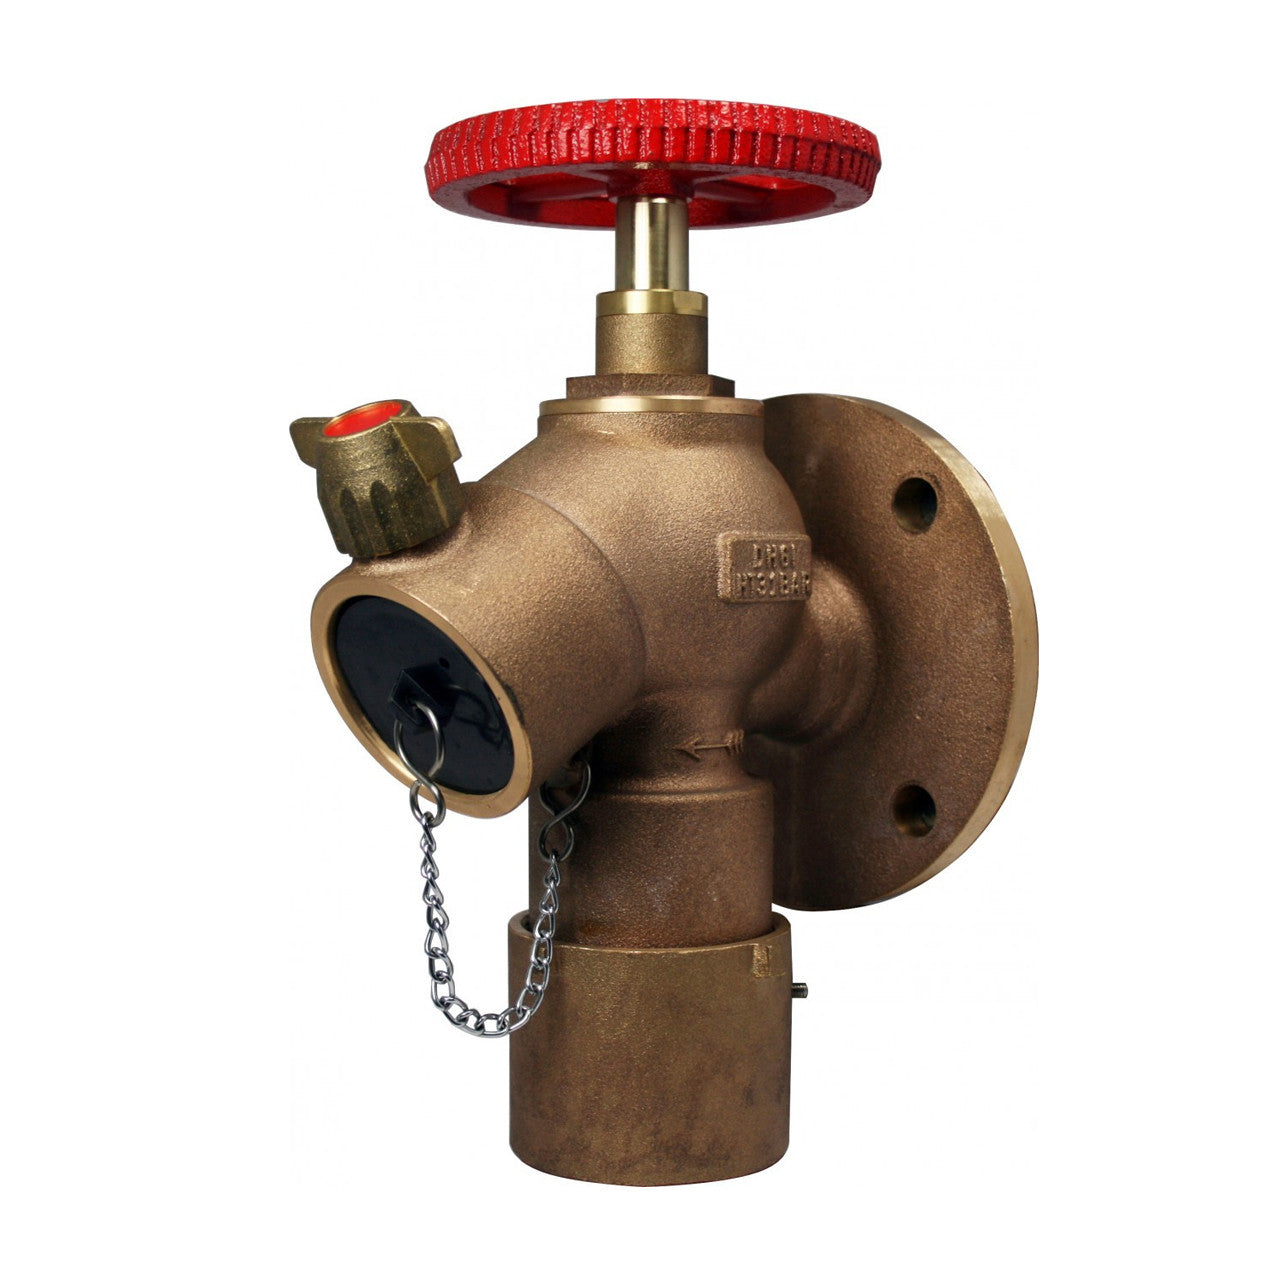 An overview of Fire Hydrant - ThePipingMart Blog